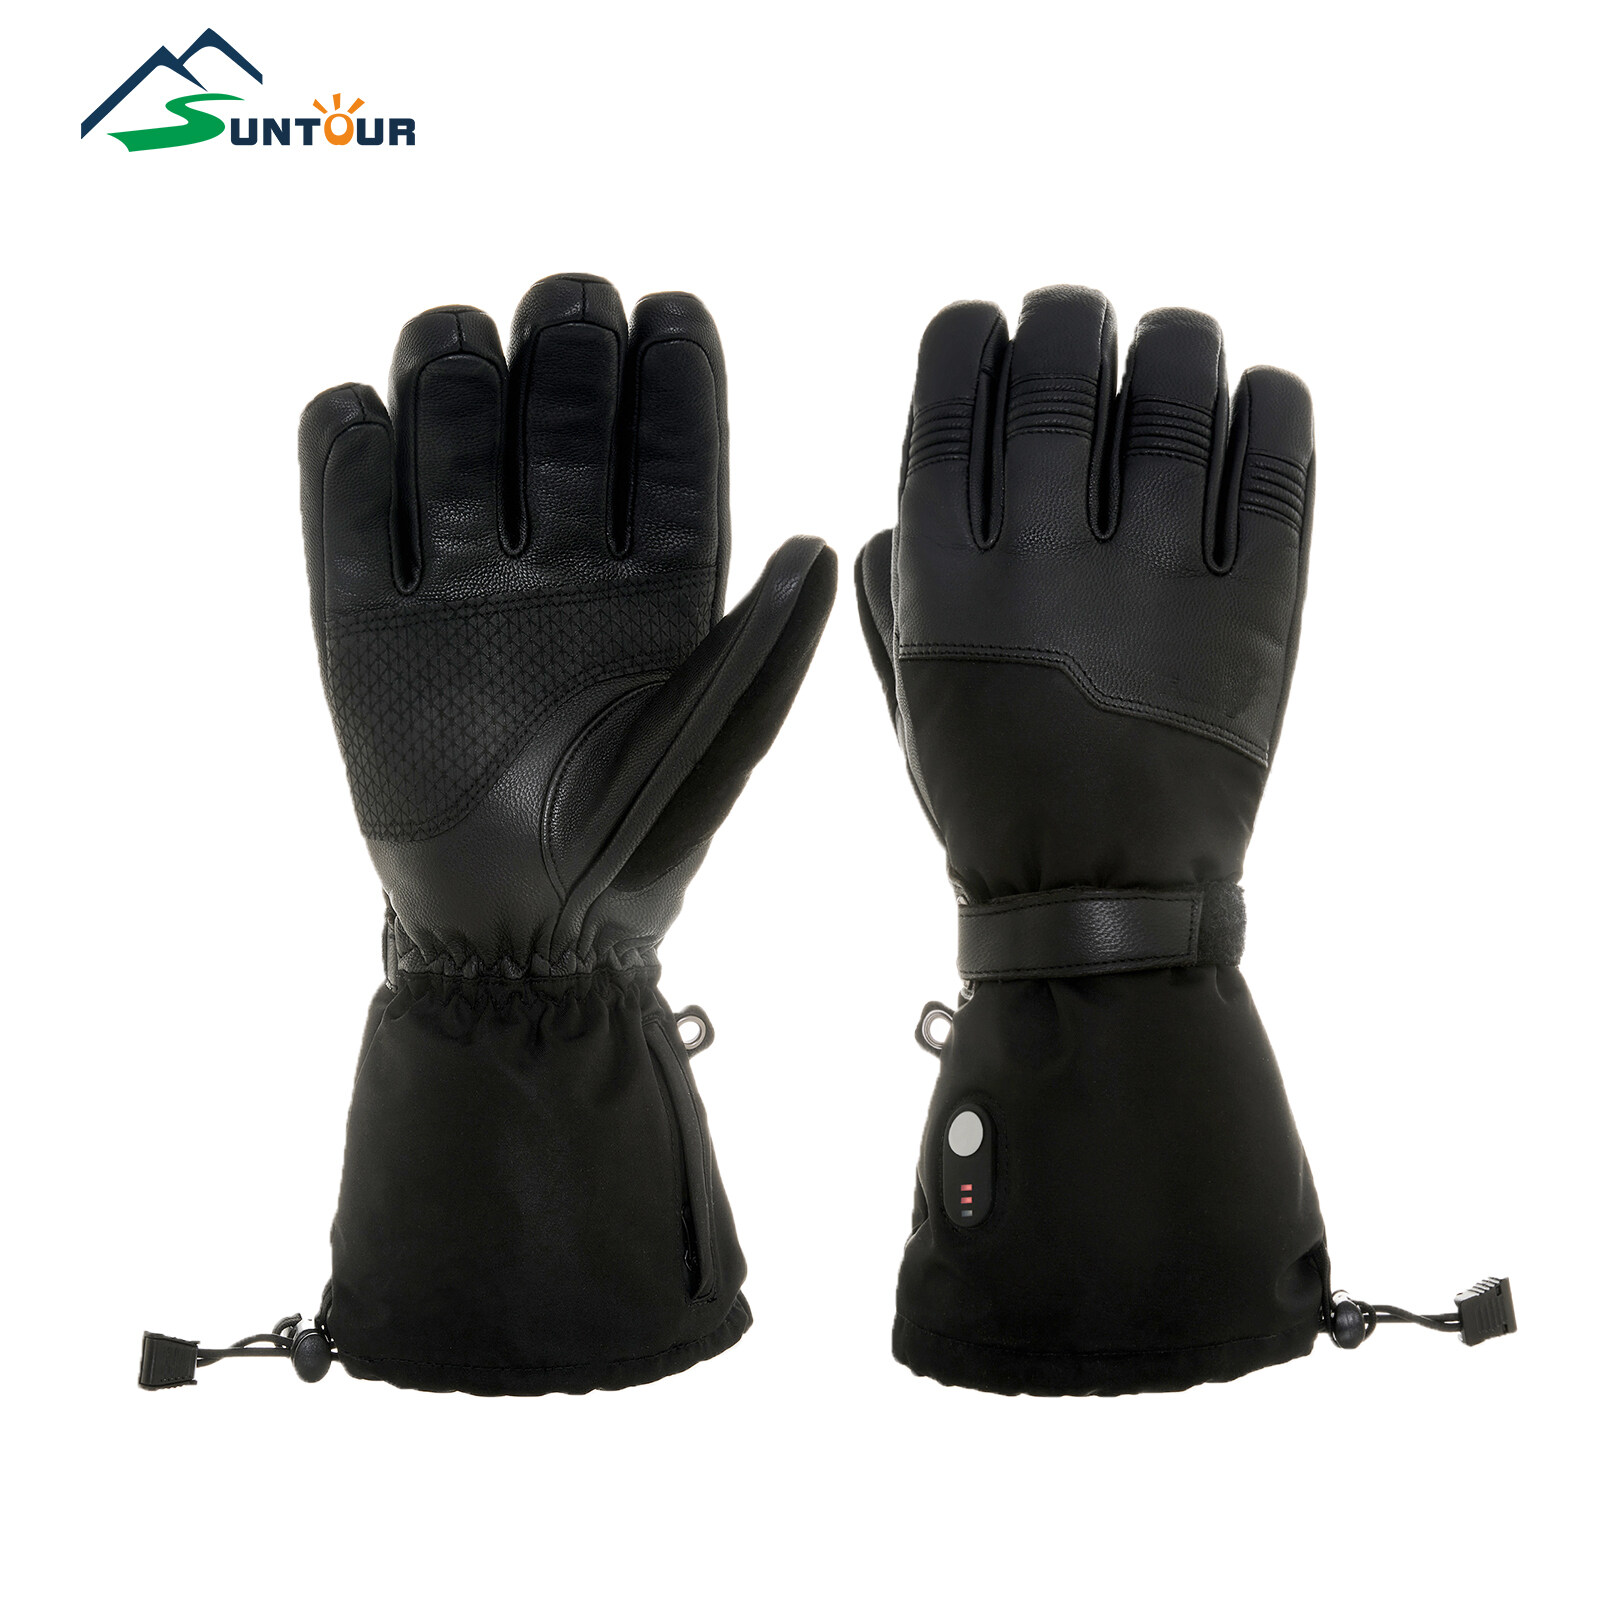 Winter warm leather heated windproof waterproof breathable touch screen riding gloves